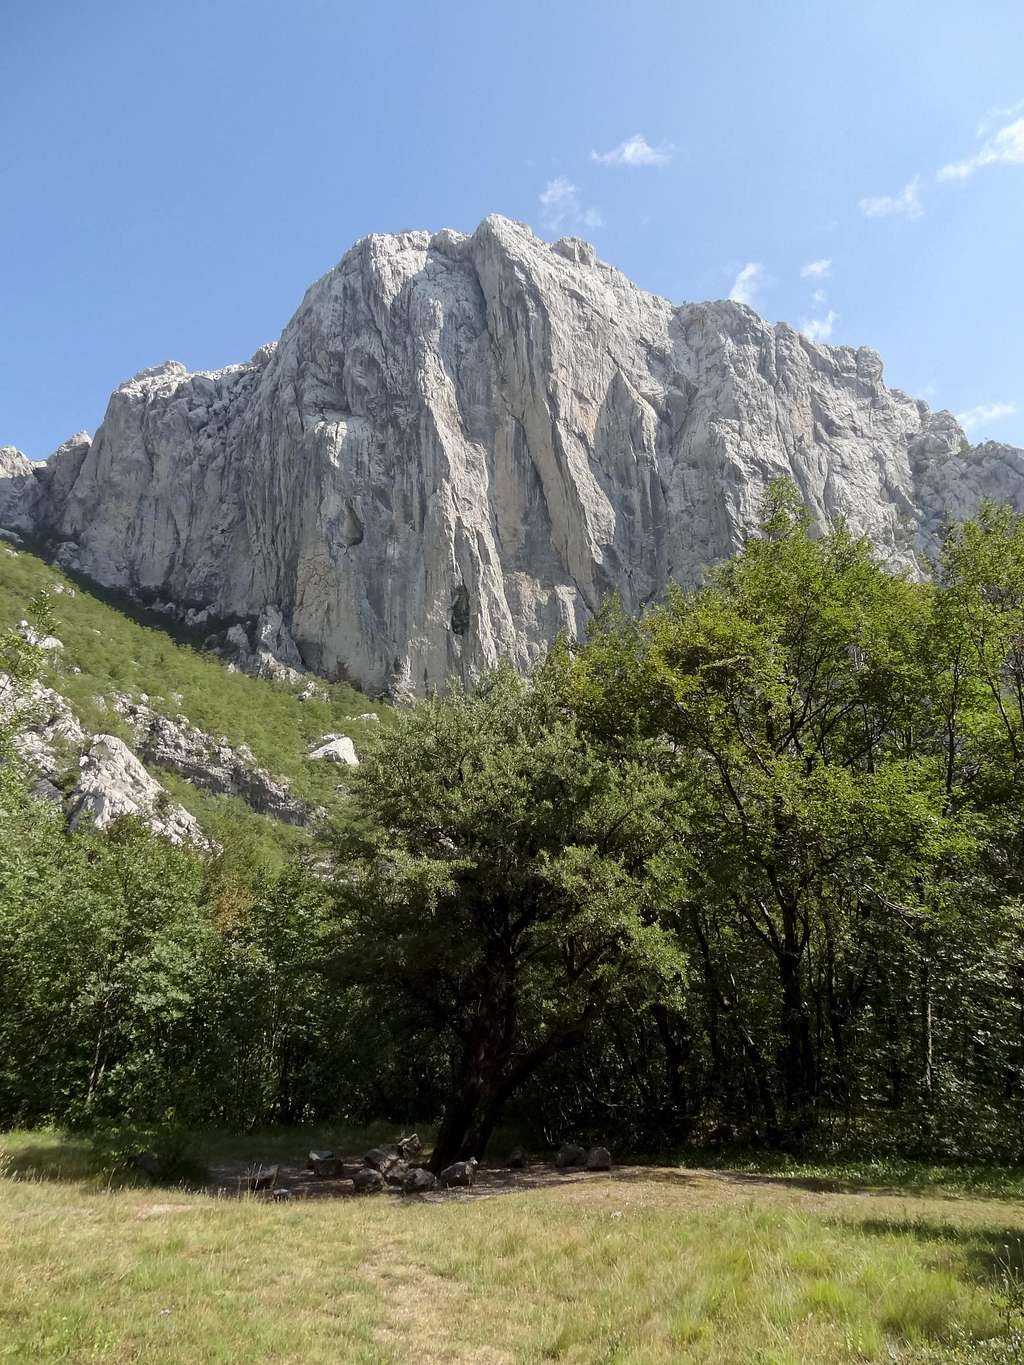 The tallest Paklenica cliffs appear in all their splendour during the descent